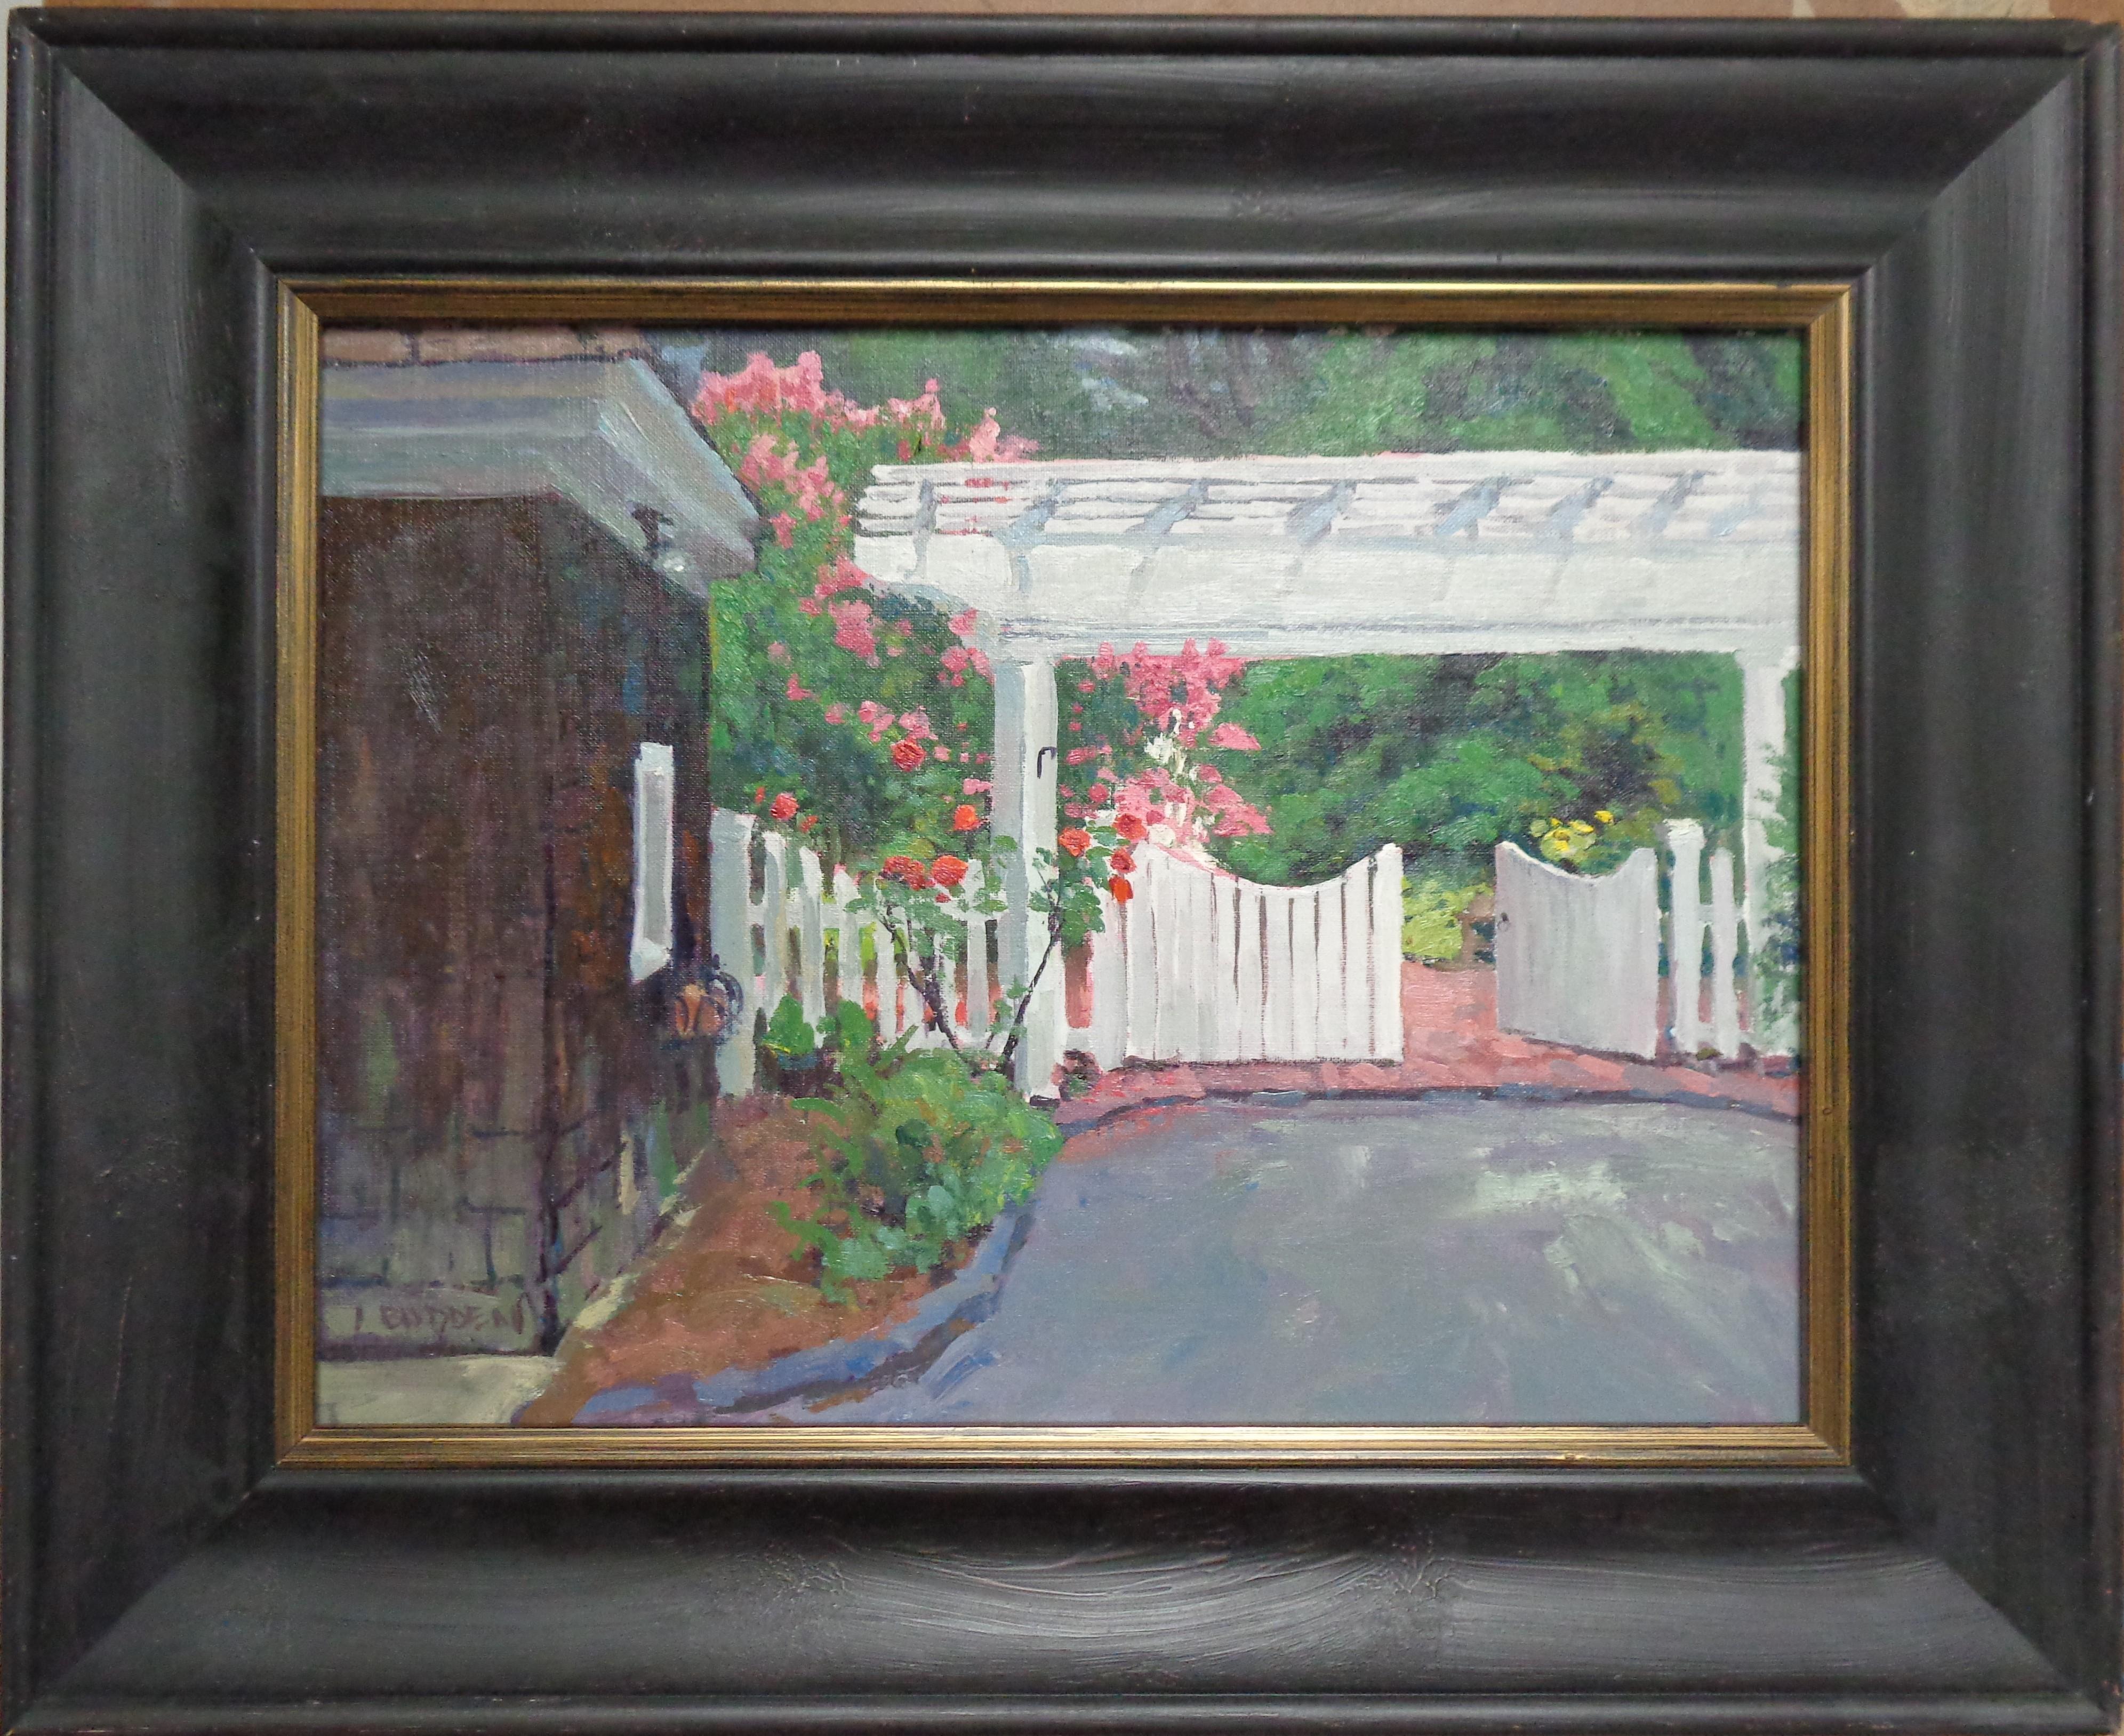 An oil painting on canvas that showcases the beautiful light of a summer day shinning on a garden of roses. This painting was painted en plein air on location in an Impressionistic style.

ARTIST'S STATEMENT
I have been in the art business as an